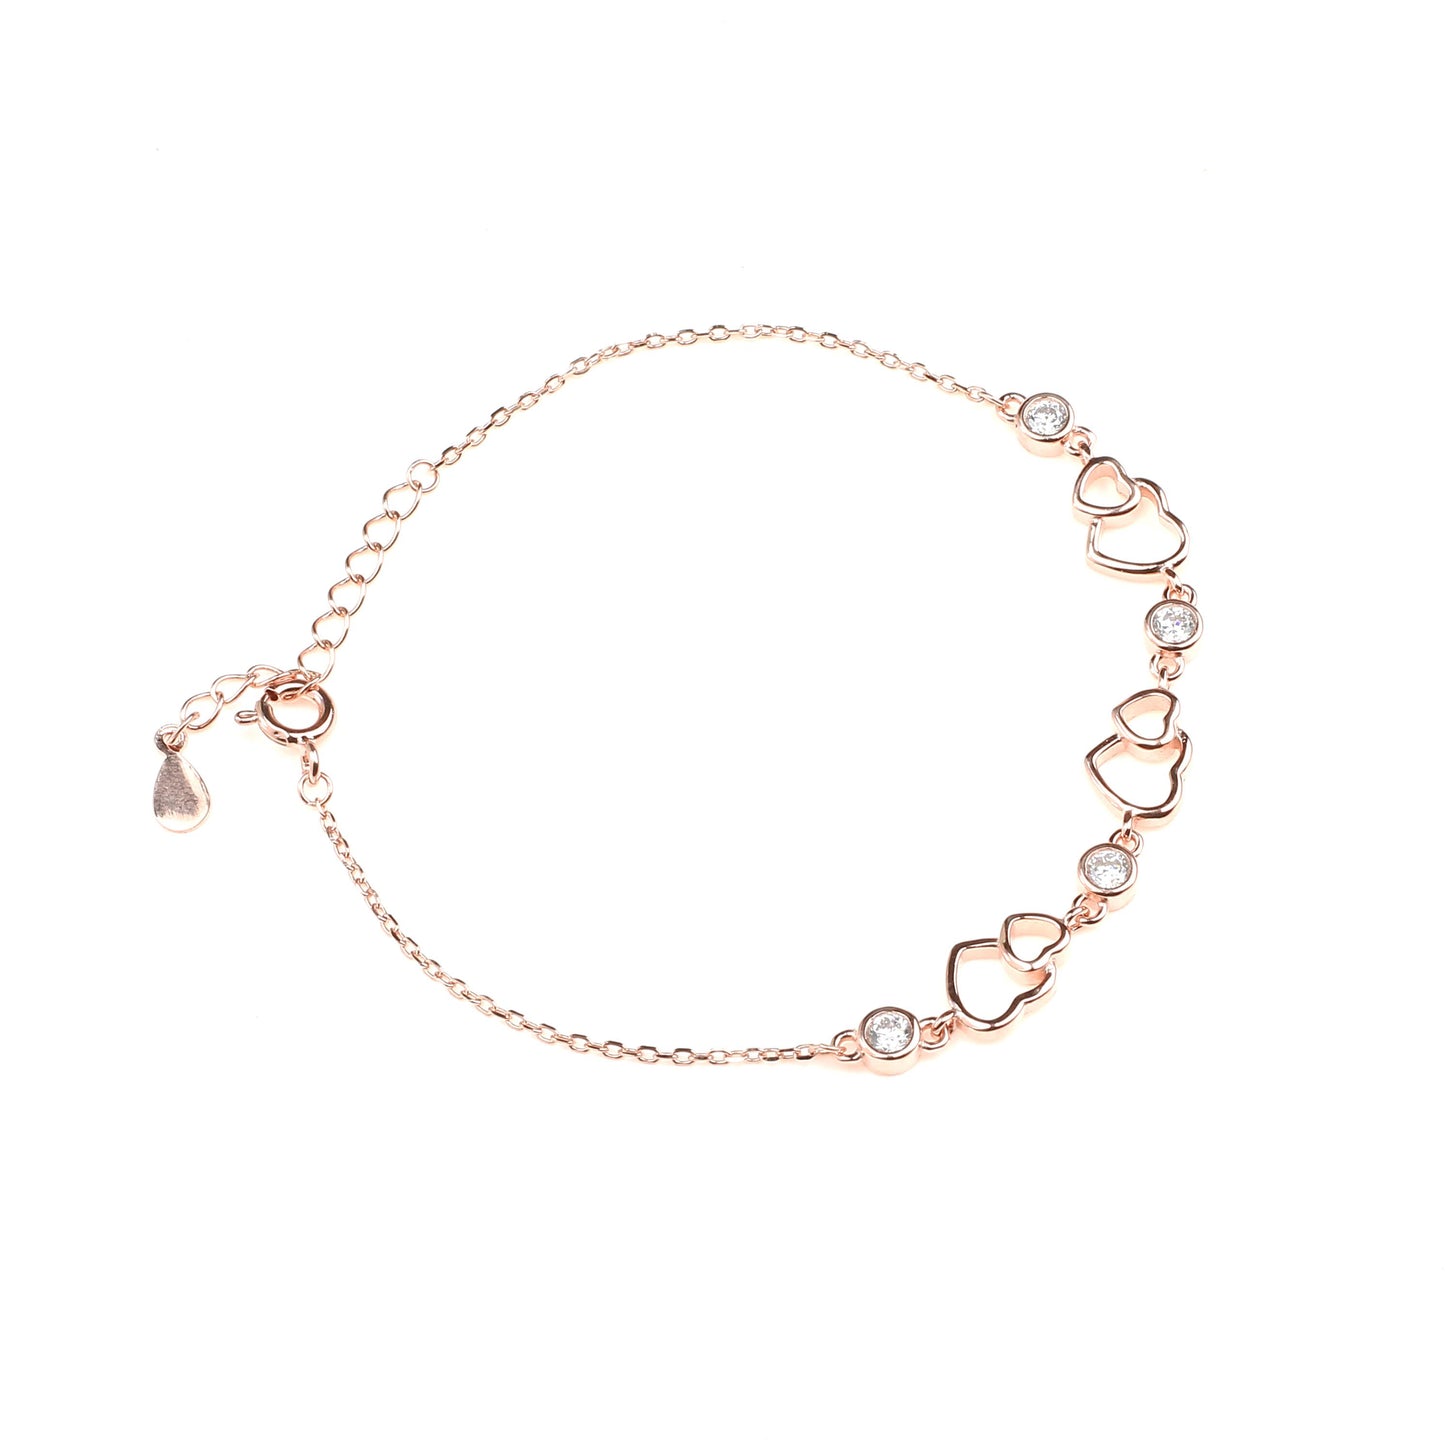 Heart link charms and white stone studded 925 sterling silver rose gold link bracelet for girls 